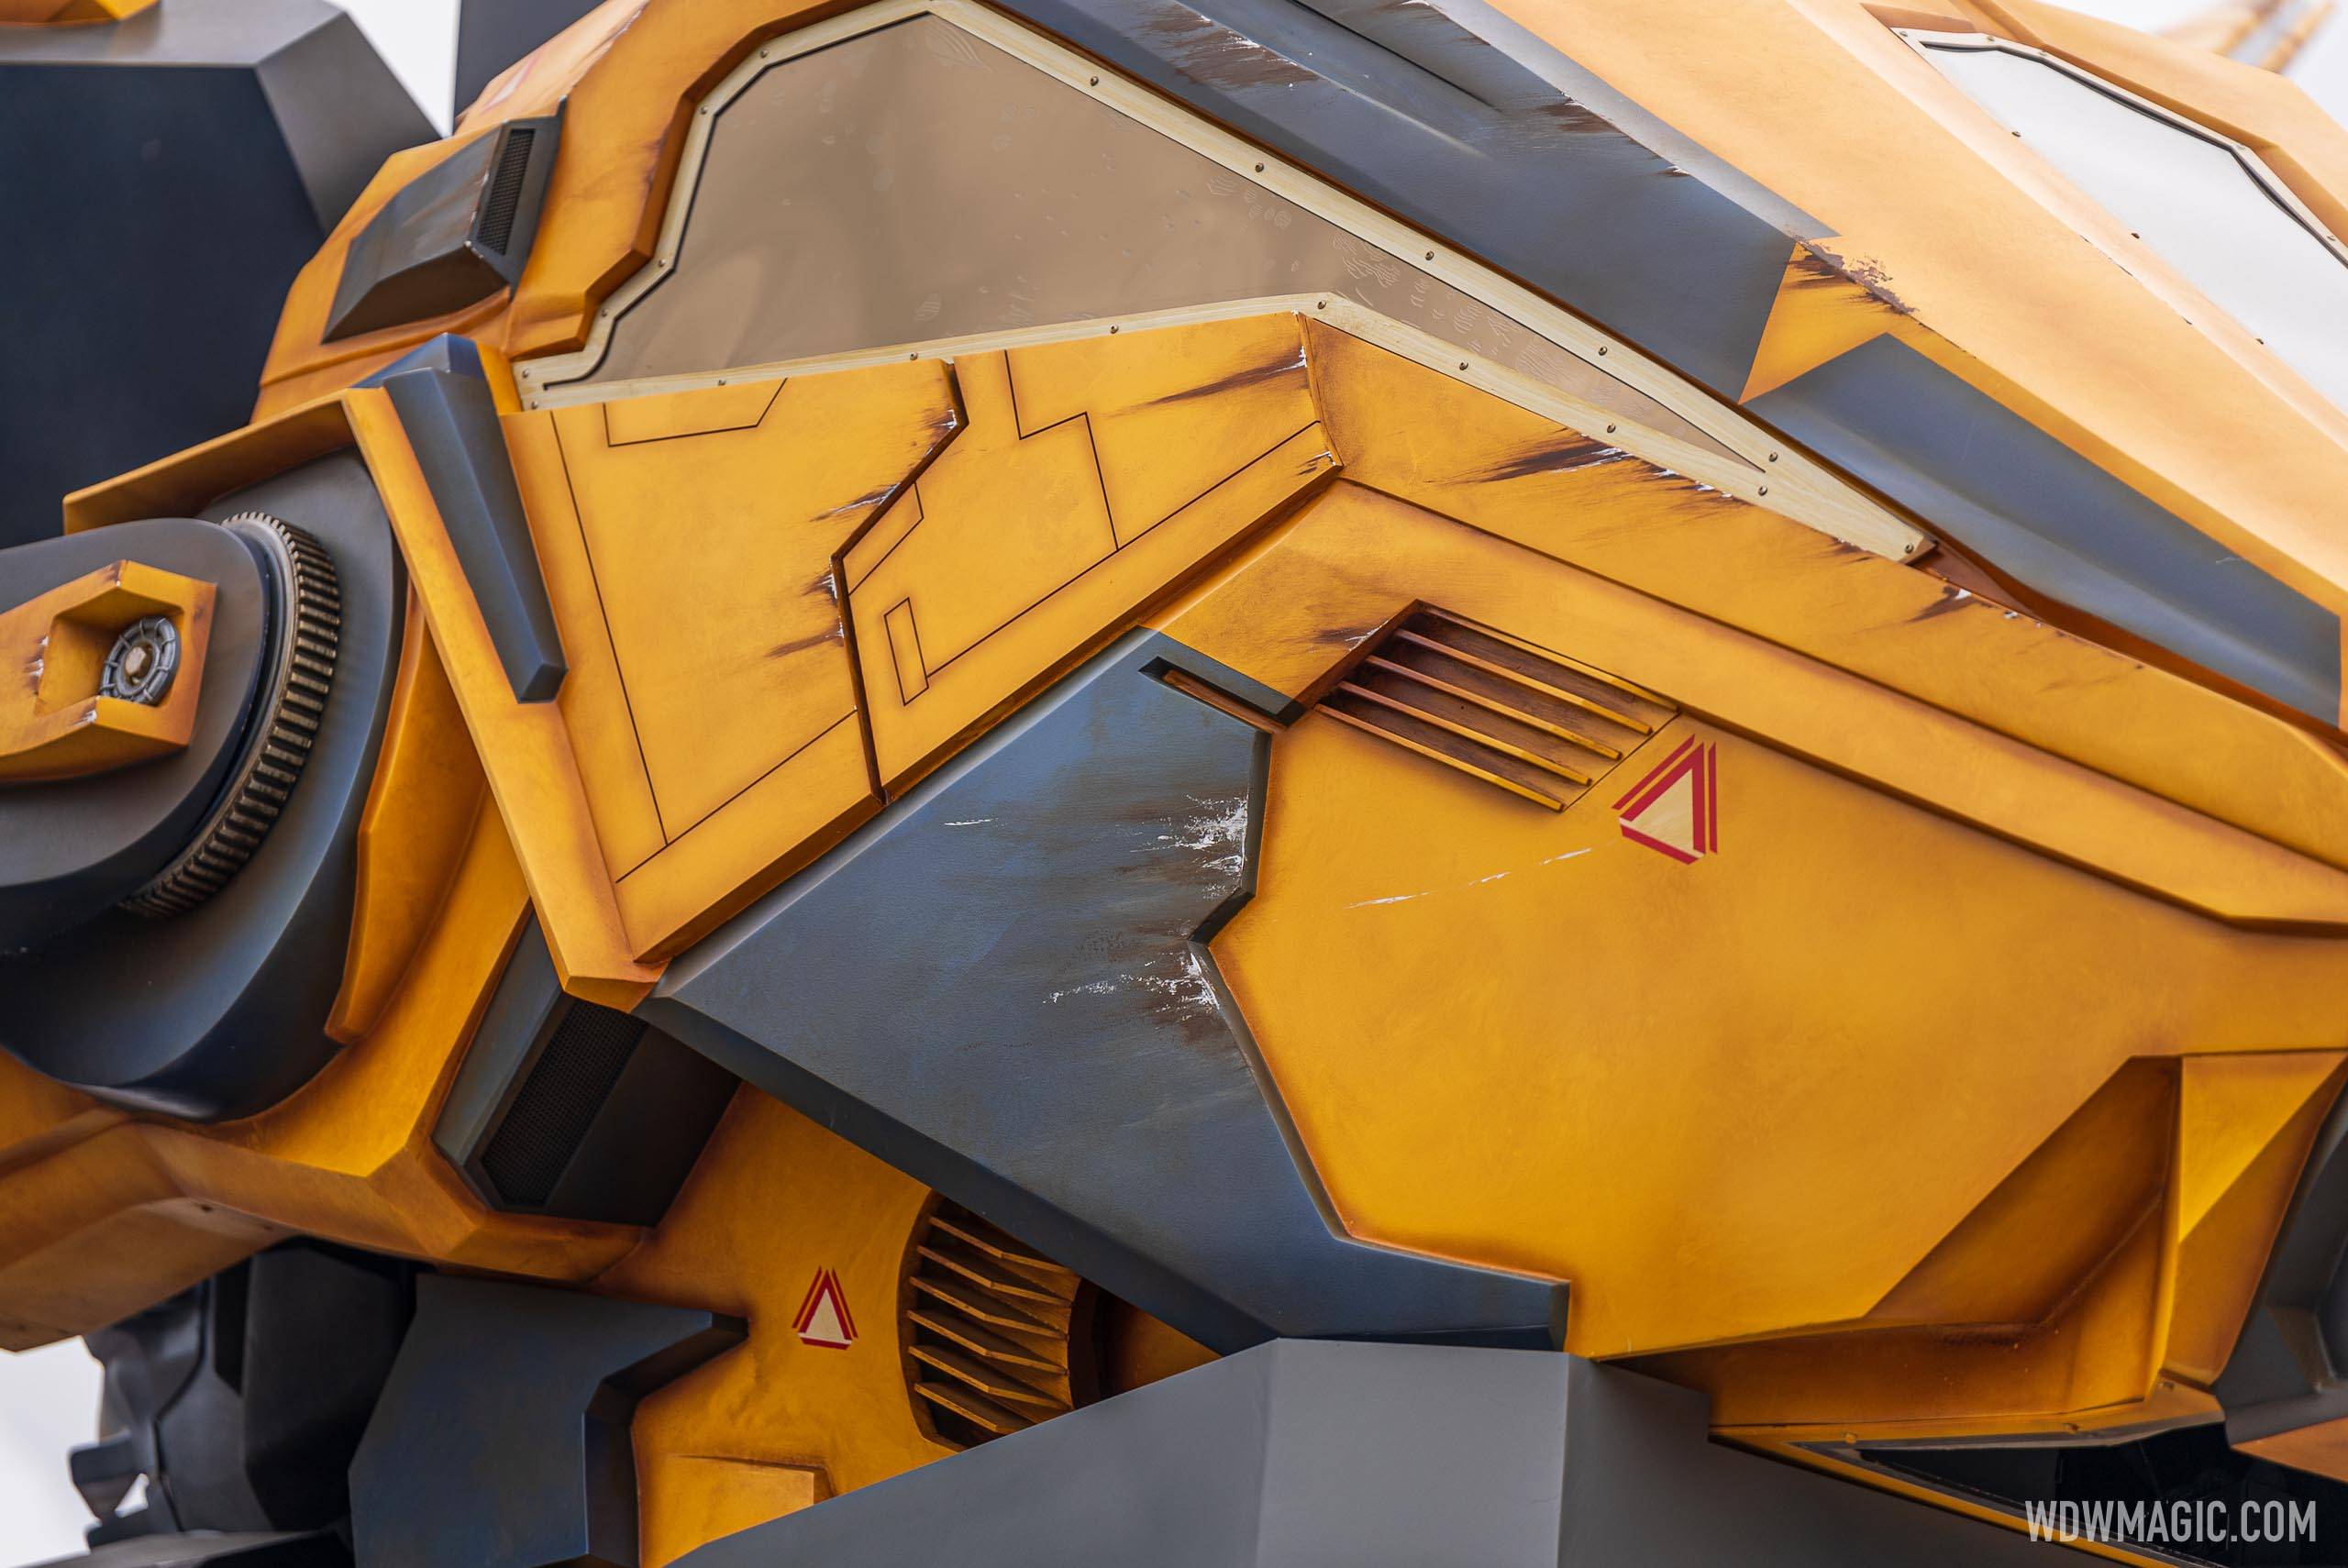 Battle damage added to the Nova Corps Starblaster ship at EPCOT's 'Guardians of the Galaxy Cosmic Rewind'